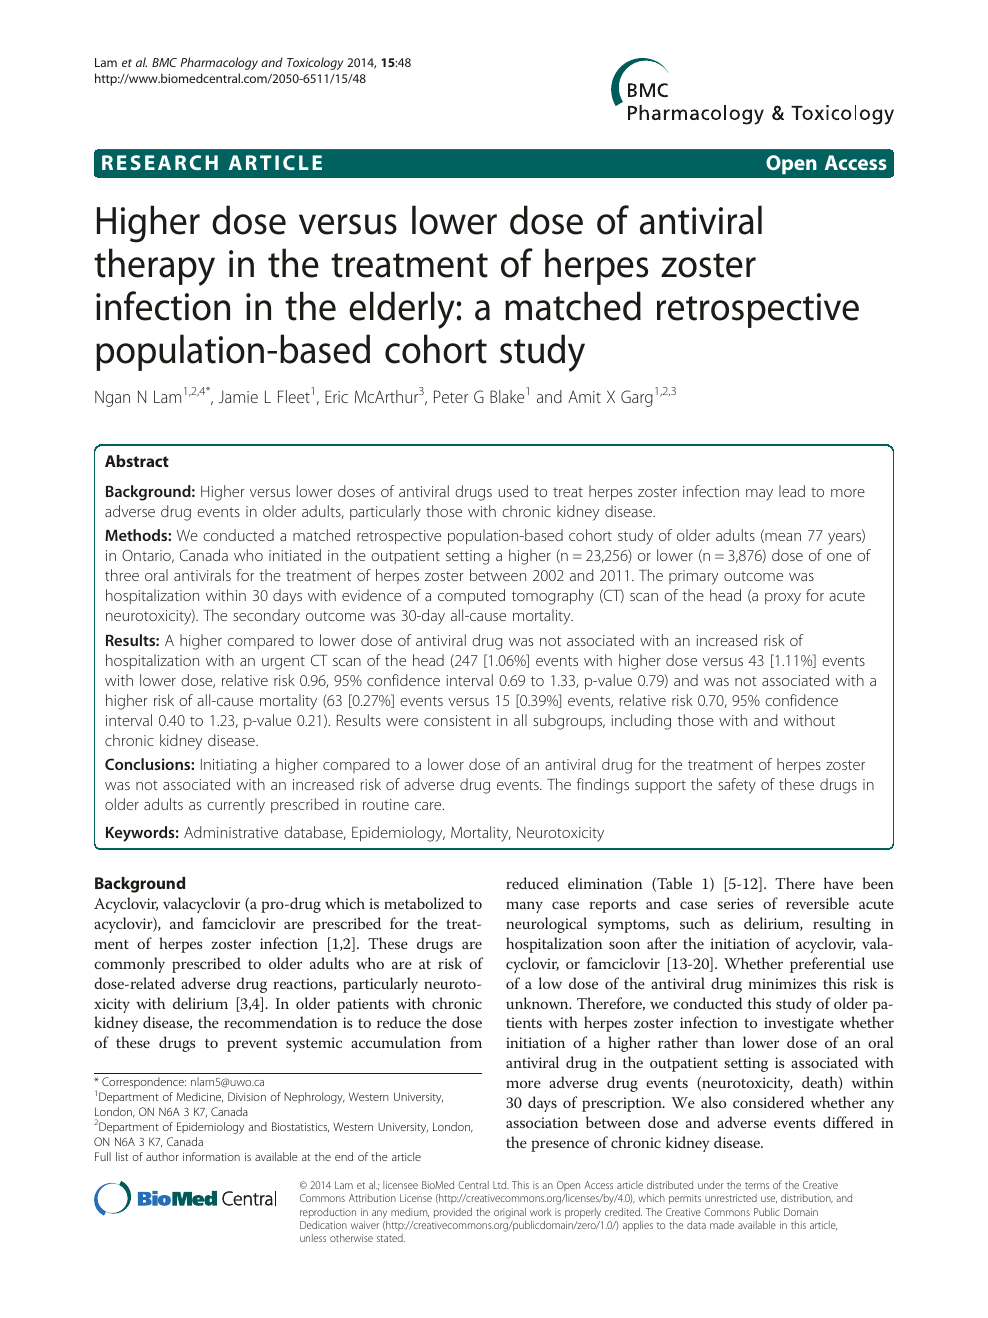 Higher Dose Versus Lower Dose Of Antiviral Therapy In The